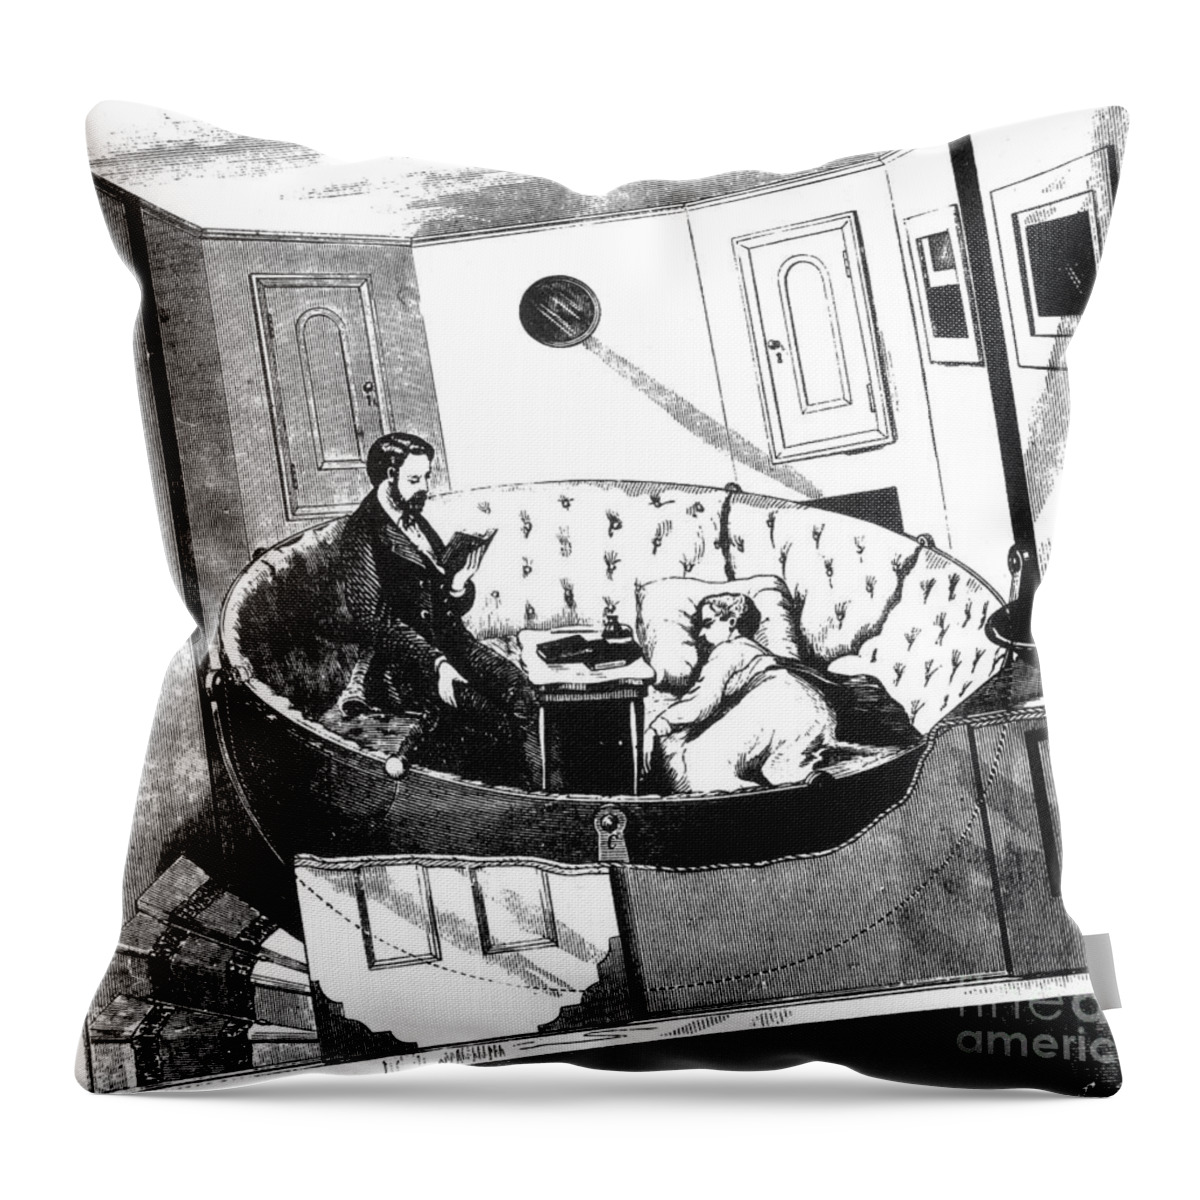 Science Throw Pillow featuring the photograph Prevention Of Seasickness 1870 by Science Source